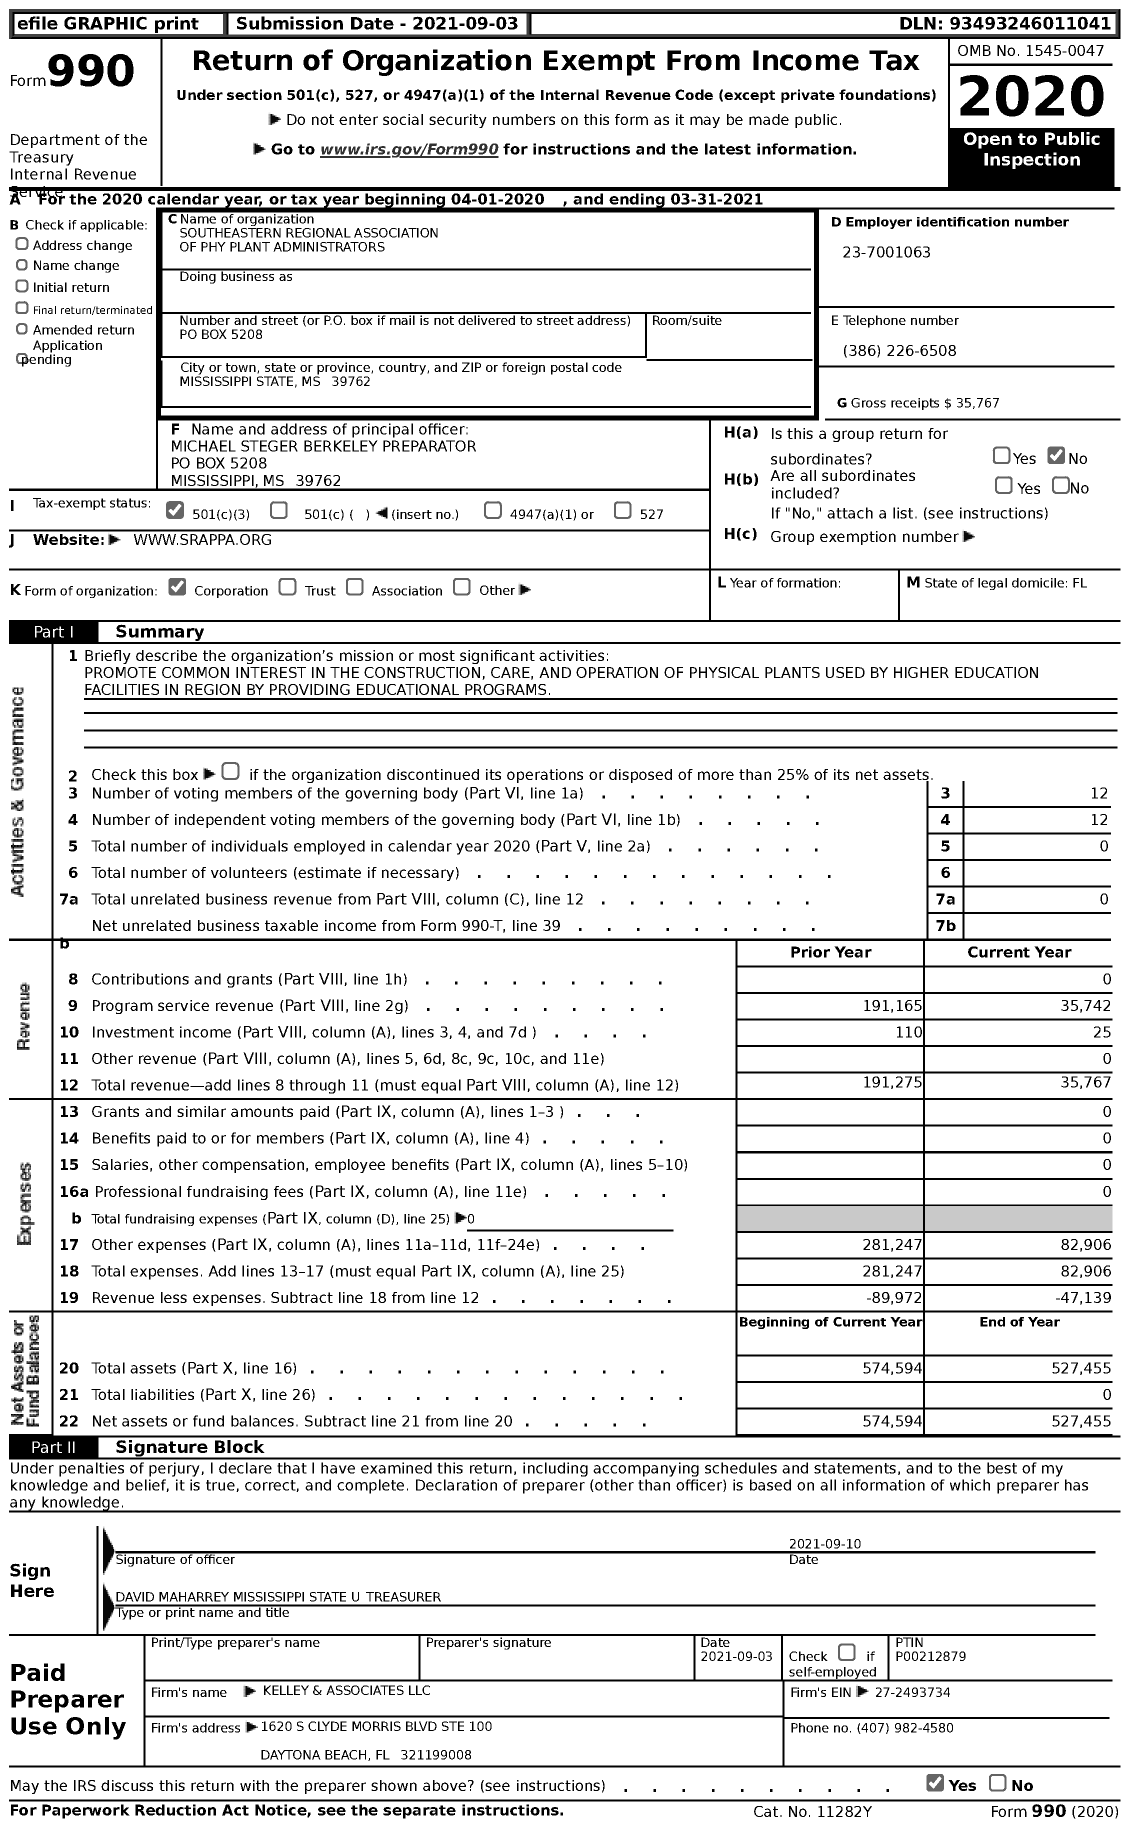 Image of first page of 2020 Form 990 for Southeastern Regional Association of Phy Plant Administrators